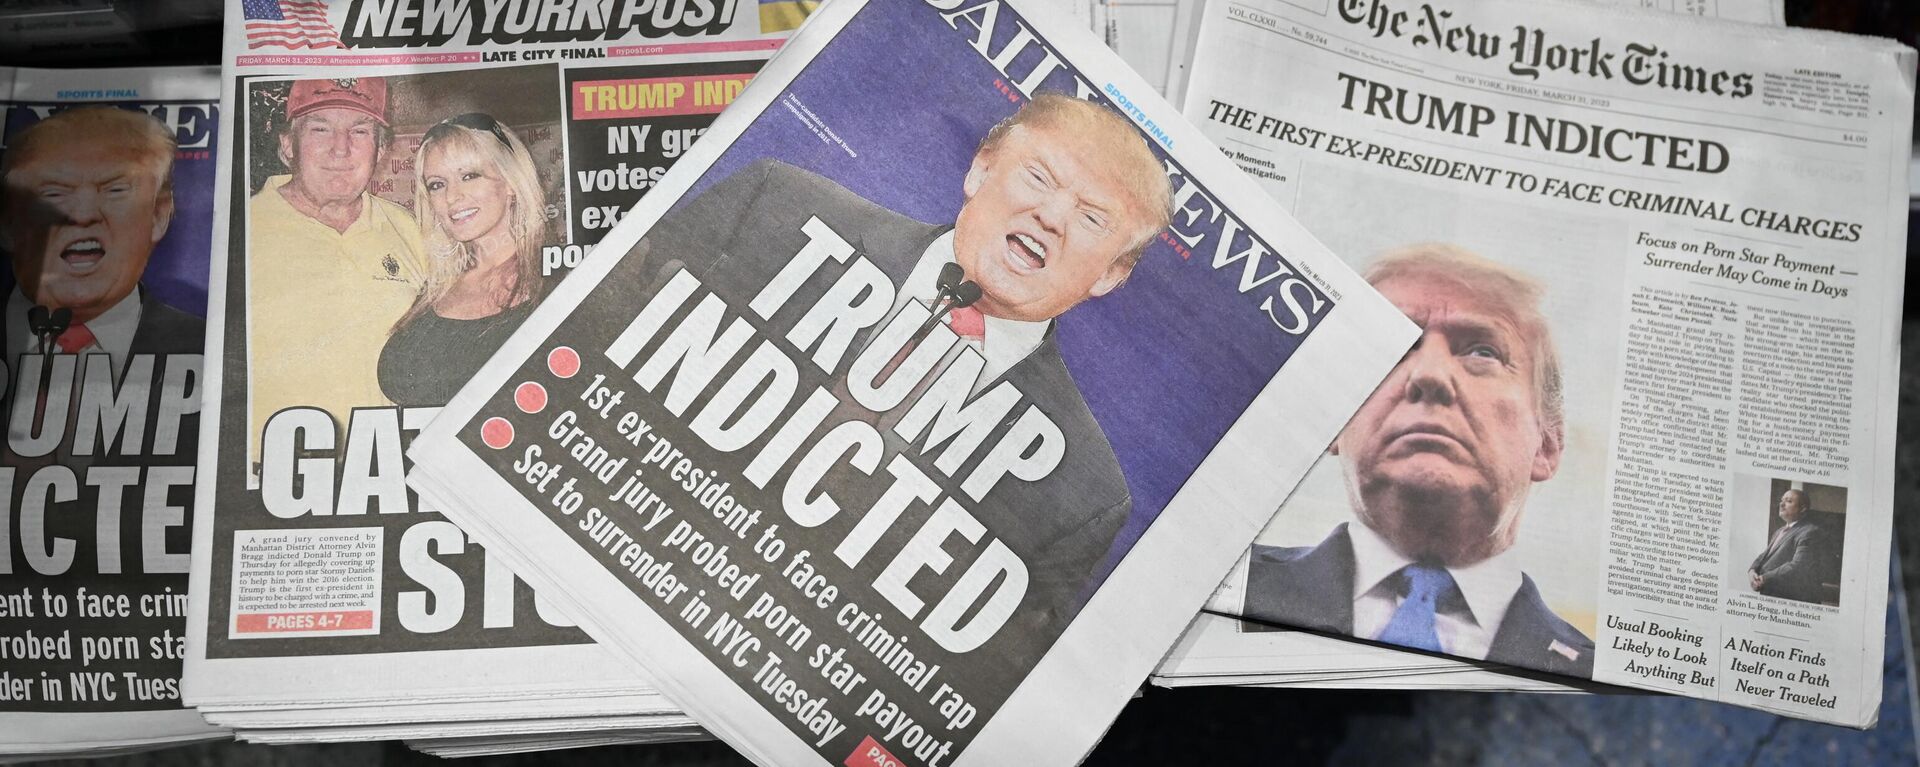 Newspaper front pages with former US President Donald Trump, are displayed at a news stand in New York on March 31, 2023. - Sputnik International, 1920, 04.04.2023